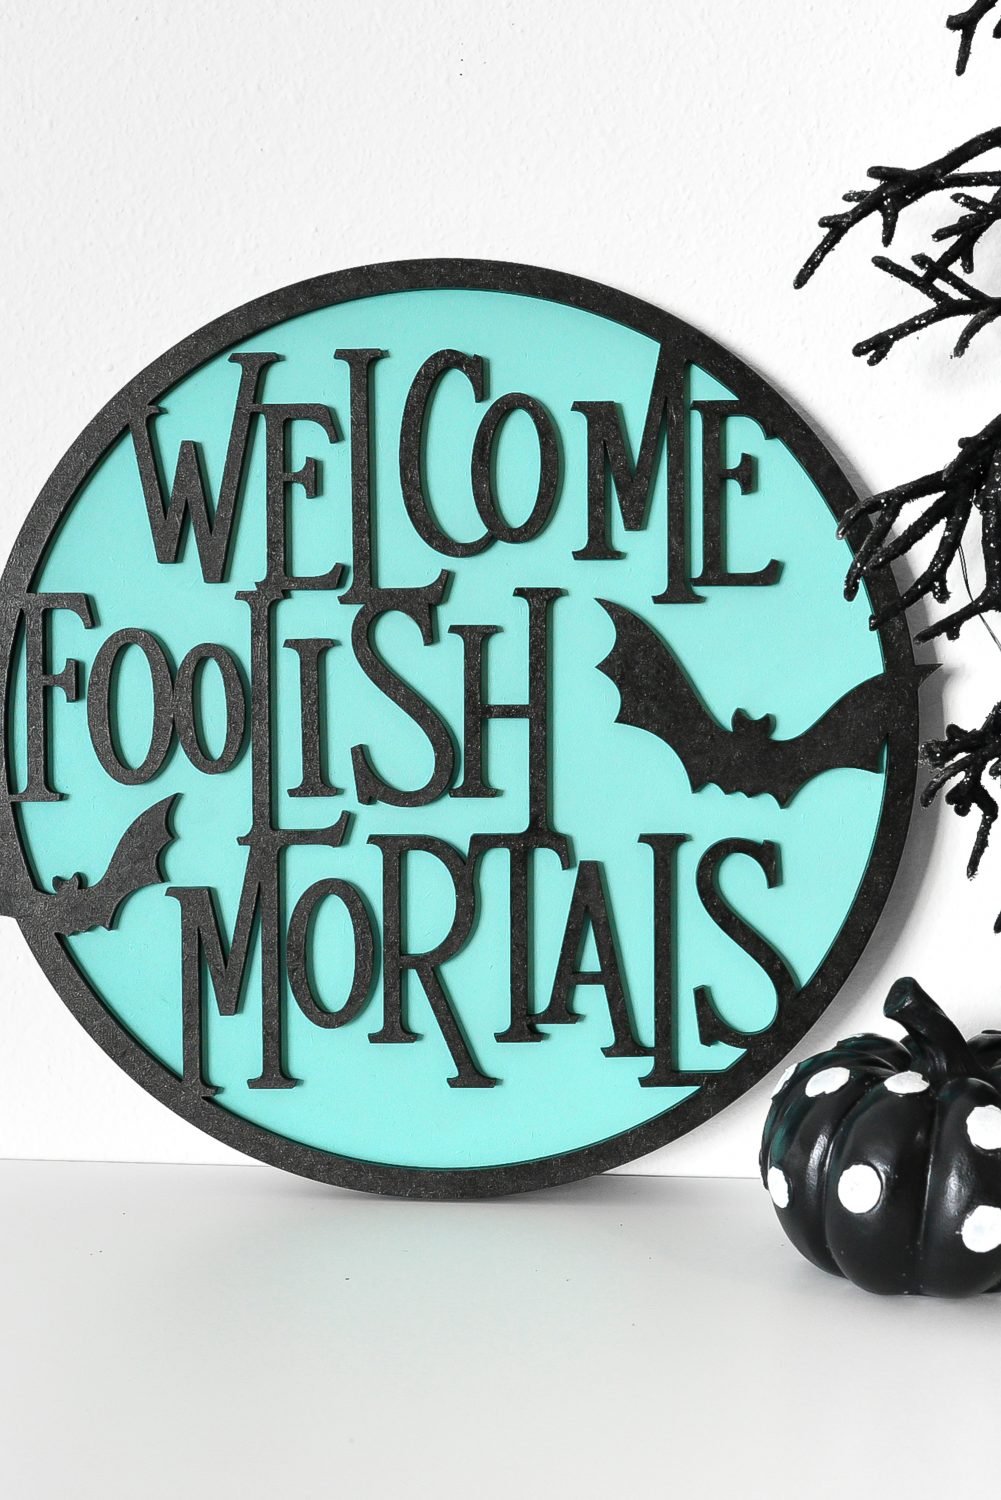 "Welcome Foolish Mortals" sign made on the Glowforge on a shelf with Halloween decor